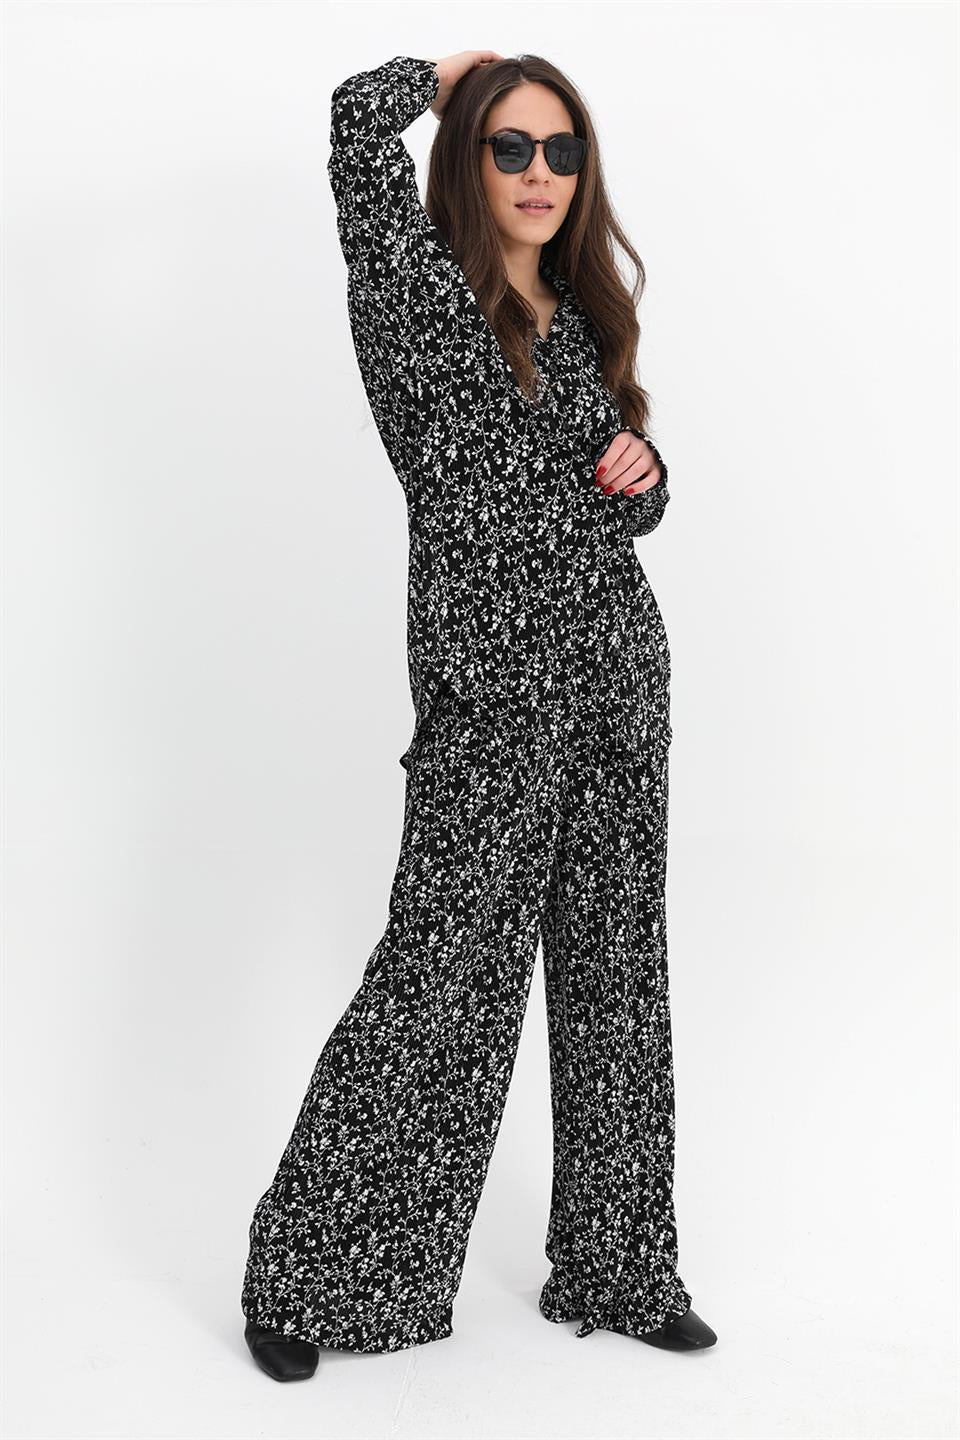 Women's Suit Pleated Knitted Floral Pattern - Black - STREET MODE ™